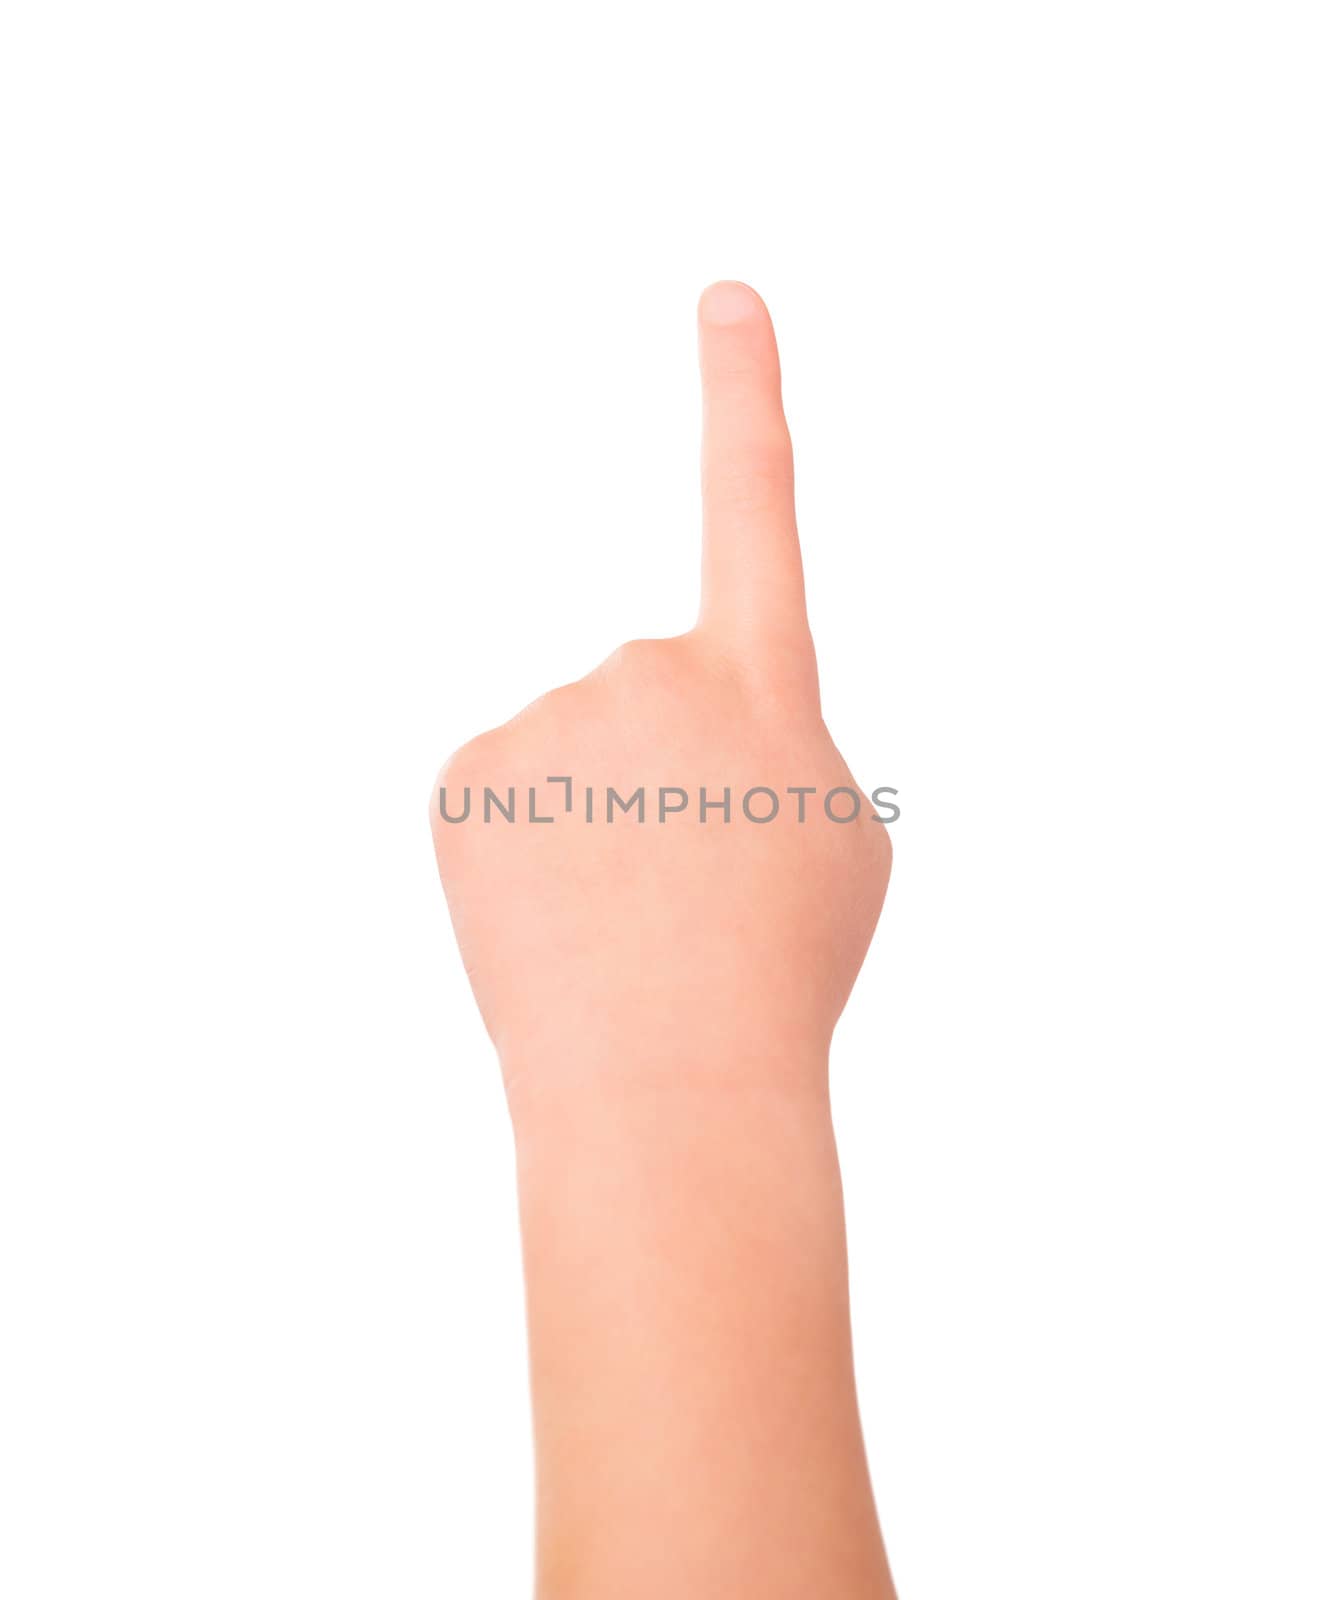 A little girl's hand (5-6 year) touching virtual screen or pointing gesture. Isolated on white.